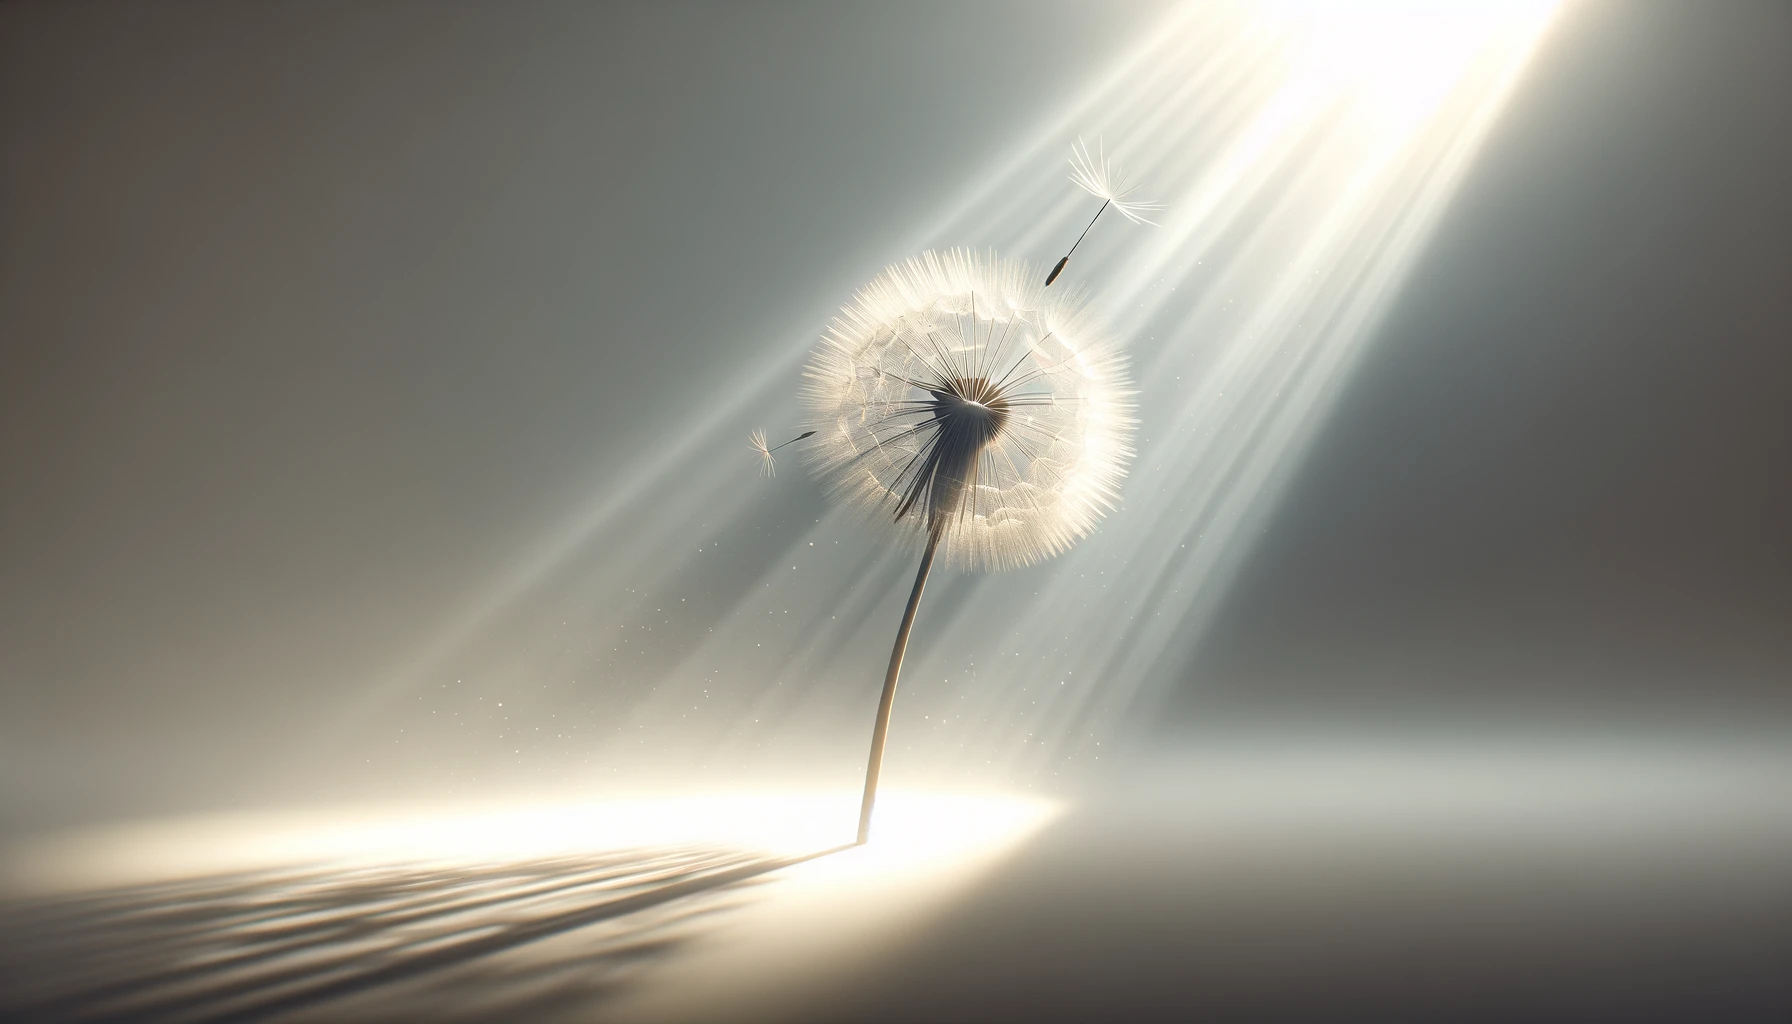 A single dandelion seed illuminated by a ray of sunlight against a white background.